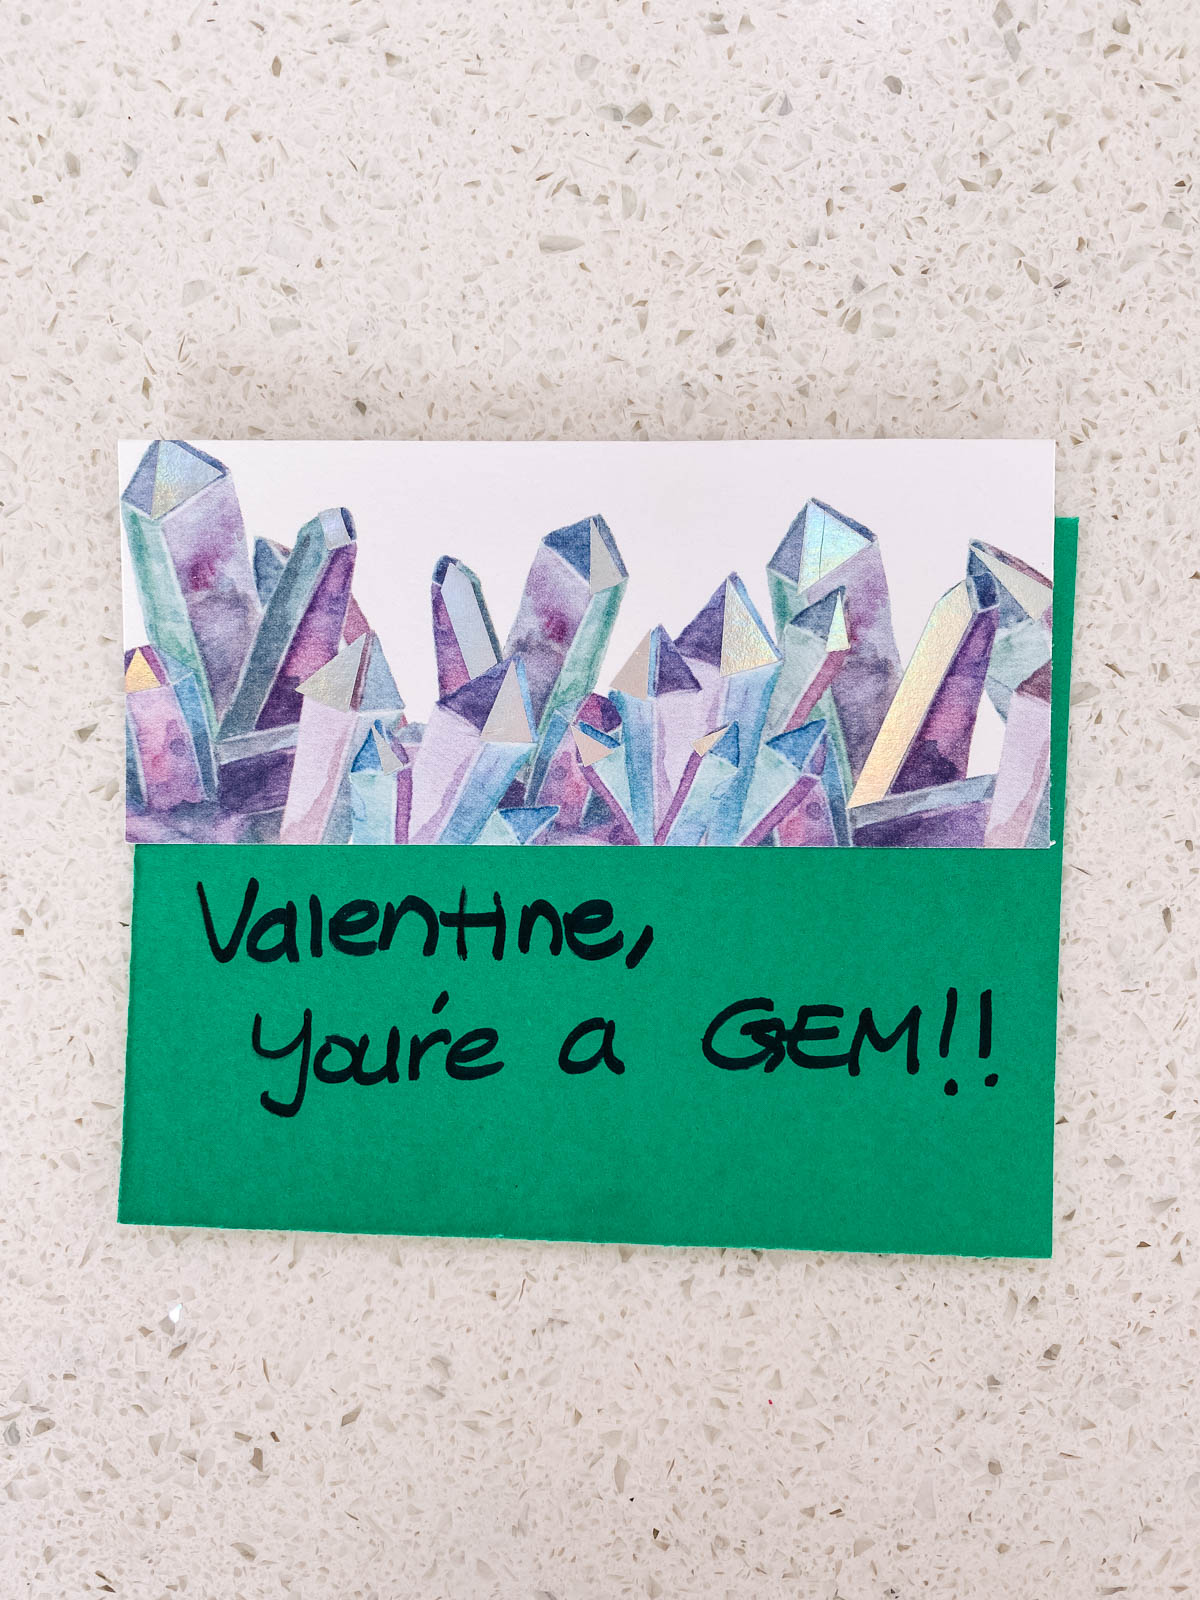 You're a gem Valentine's card and envelope on a kitchen counter.